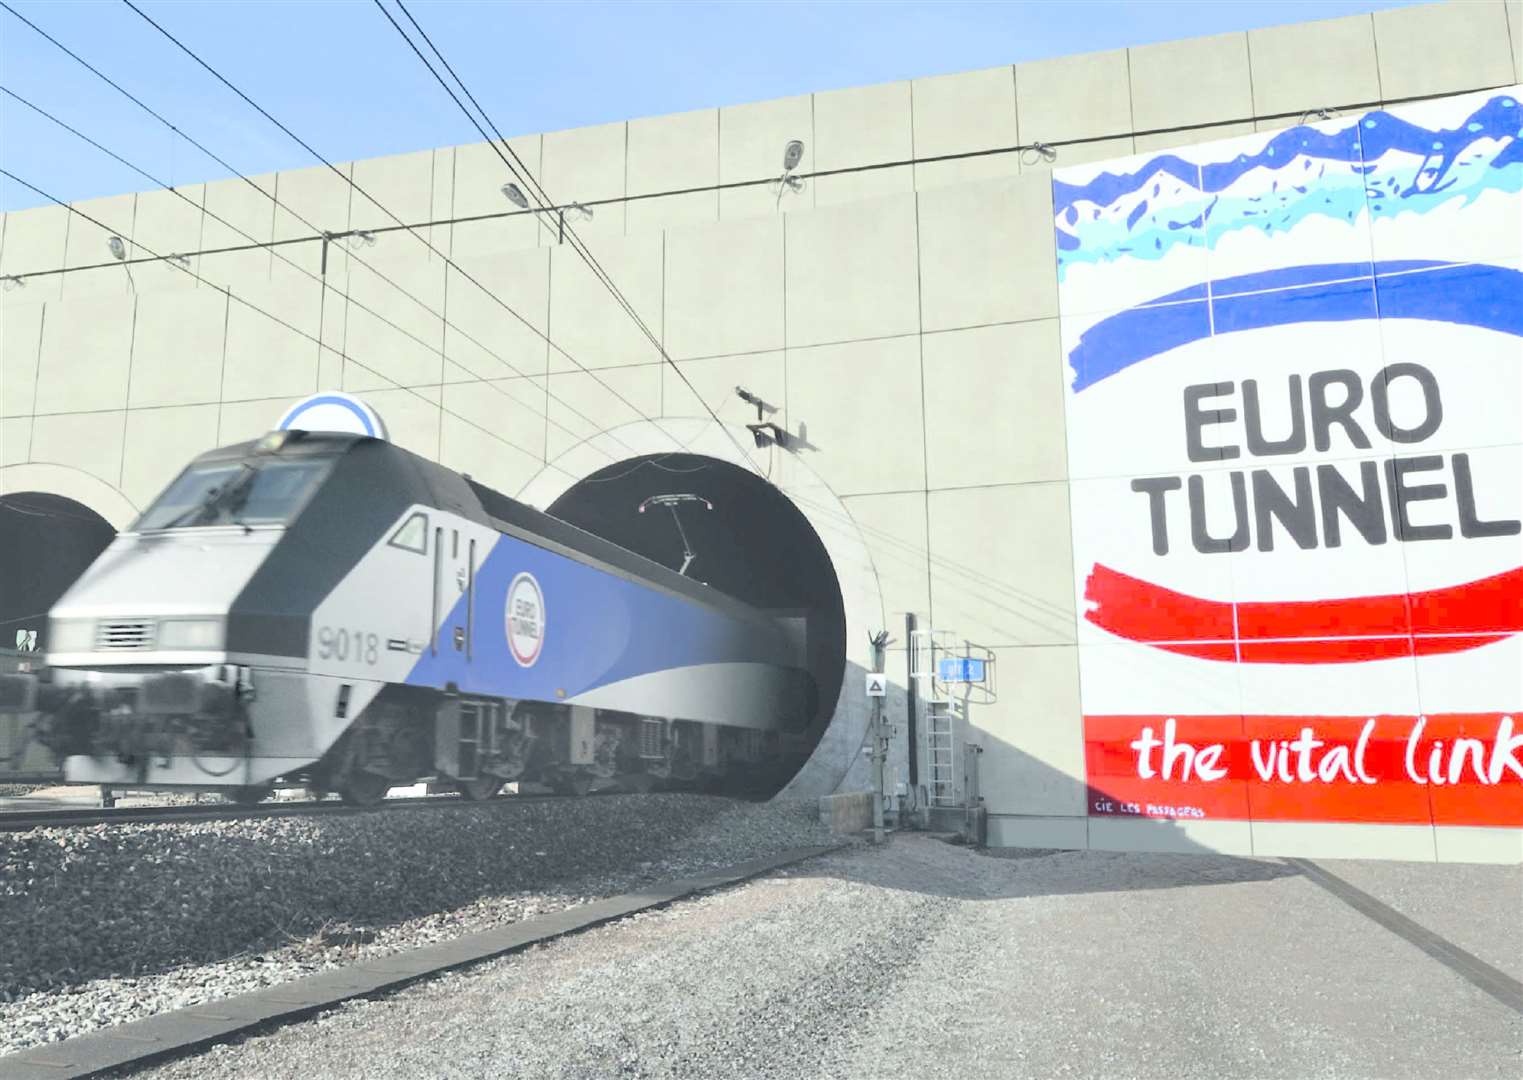 Eurotunnel has welcomed the deal to shift thousands of vehicles through its Channel route